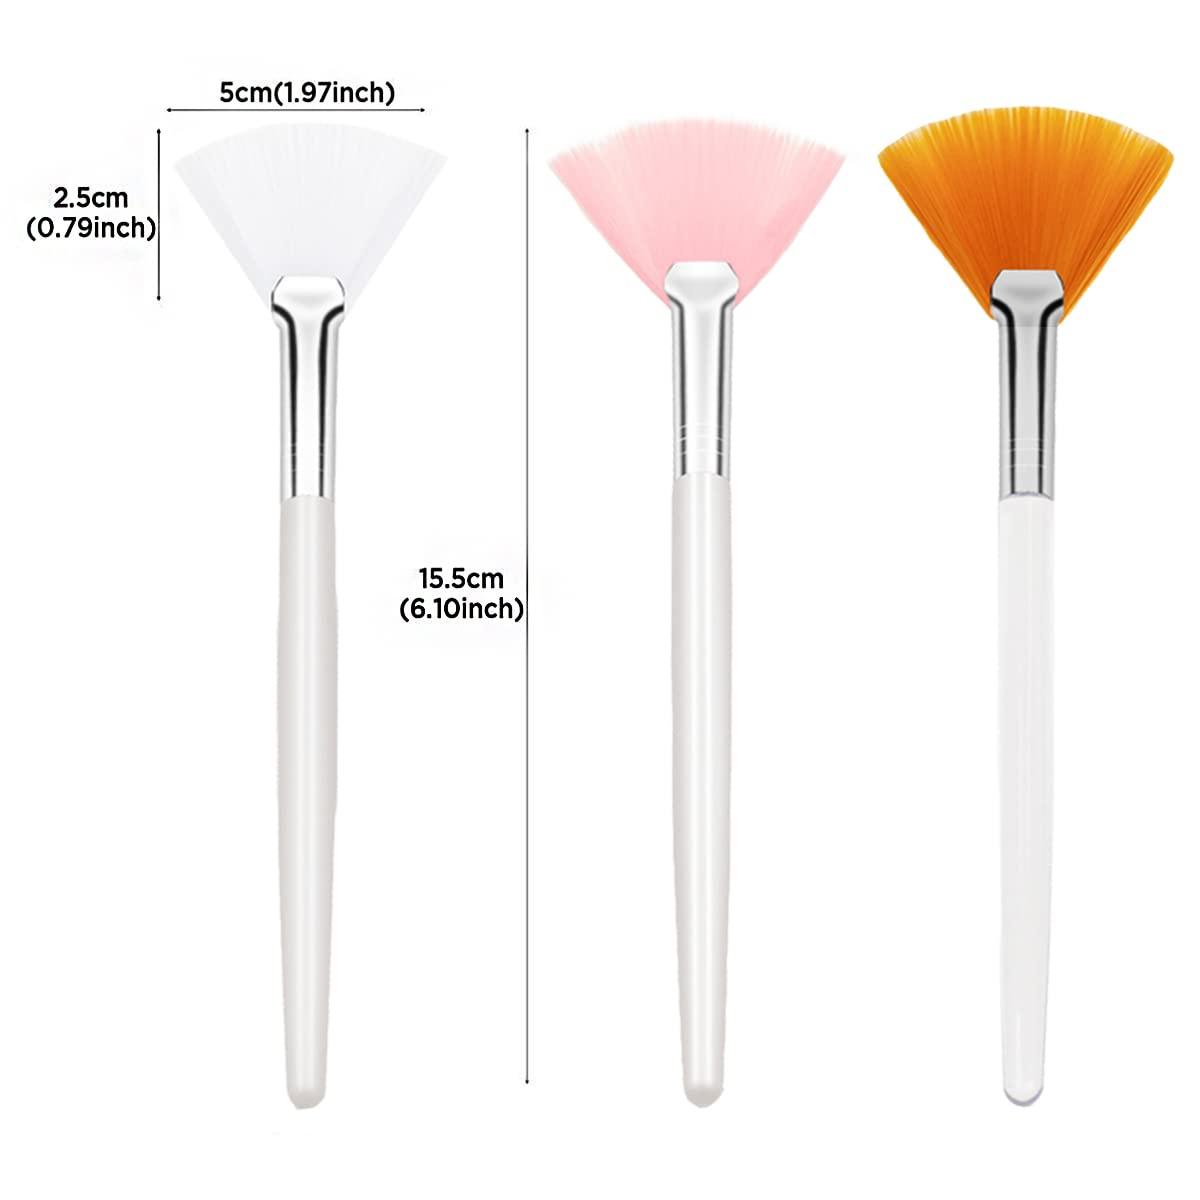 15 Pieces Fan Brushes Soft Facial Applicator Brushes Acid Applicator Brush  Cosmetic Makeup Skincare Tools for Mud Cream Pink, Yellow, White